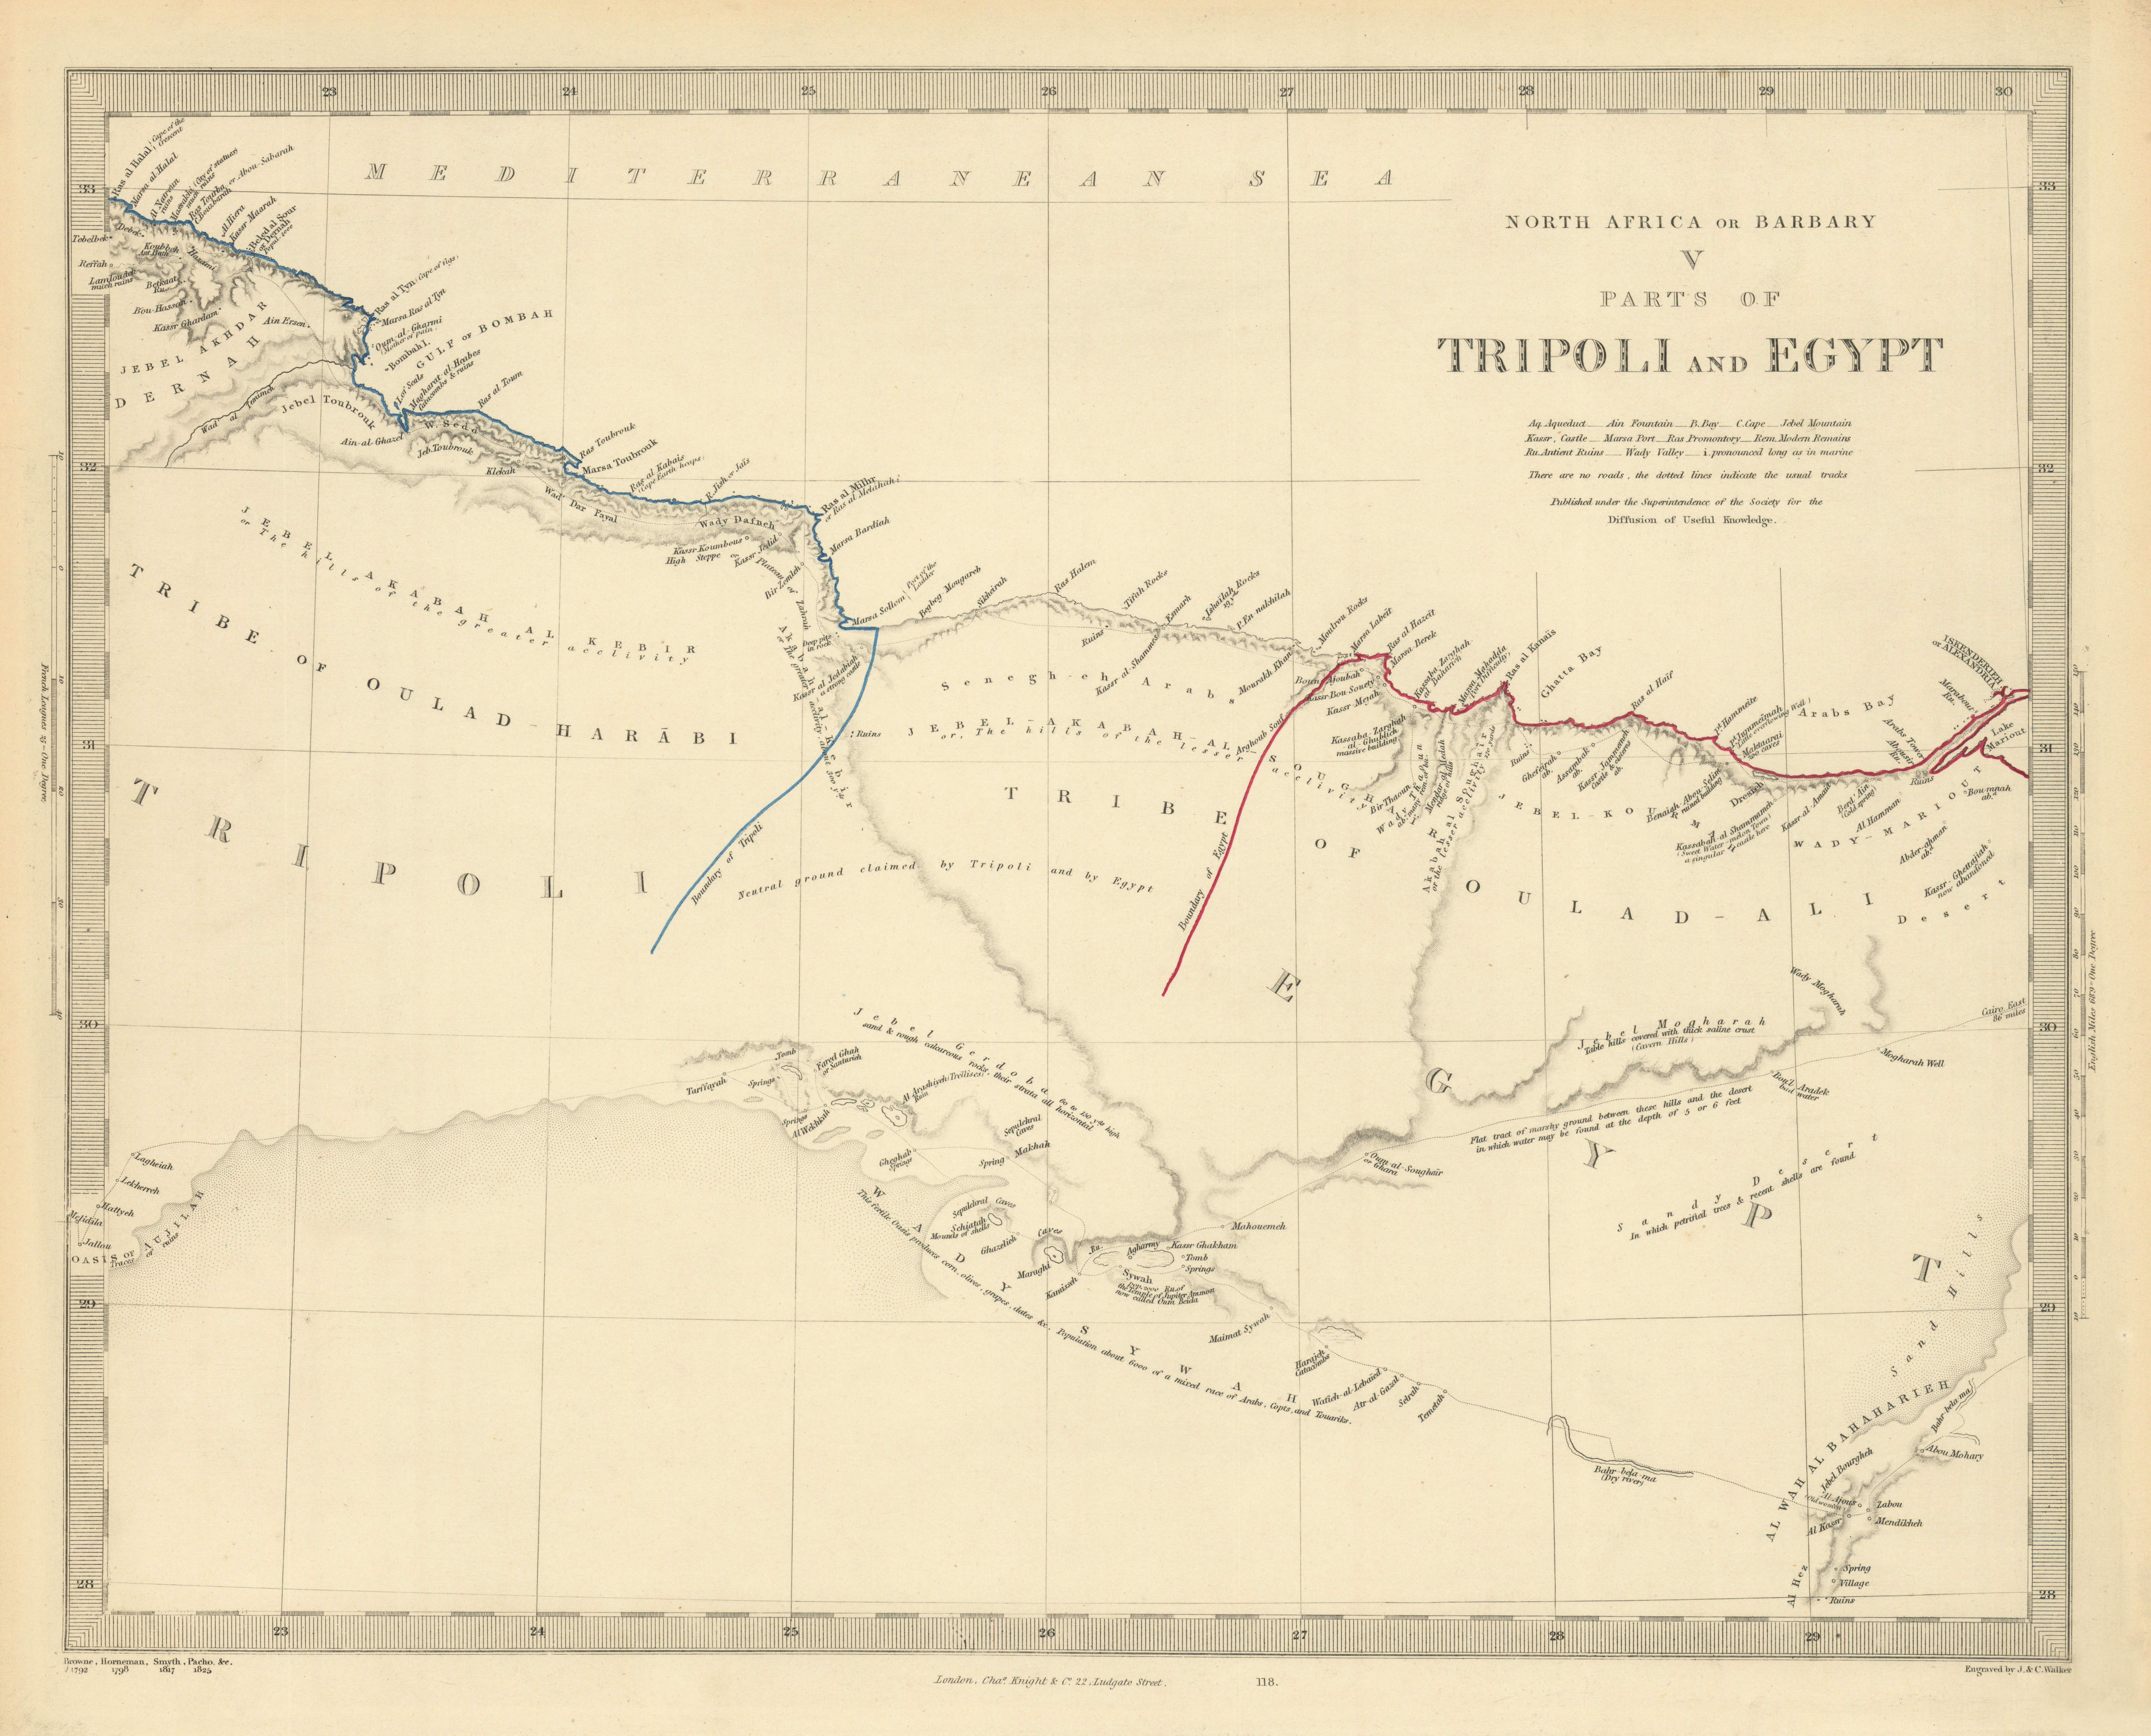 Associate Product NORTH AFRICA OF BABRBARY V Parts of Tripoli & Egypt. Libya Tribes. SDUK 1851 map